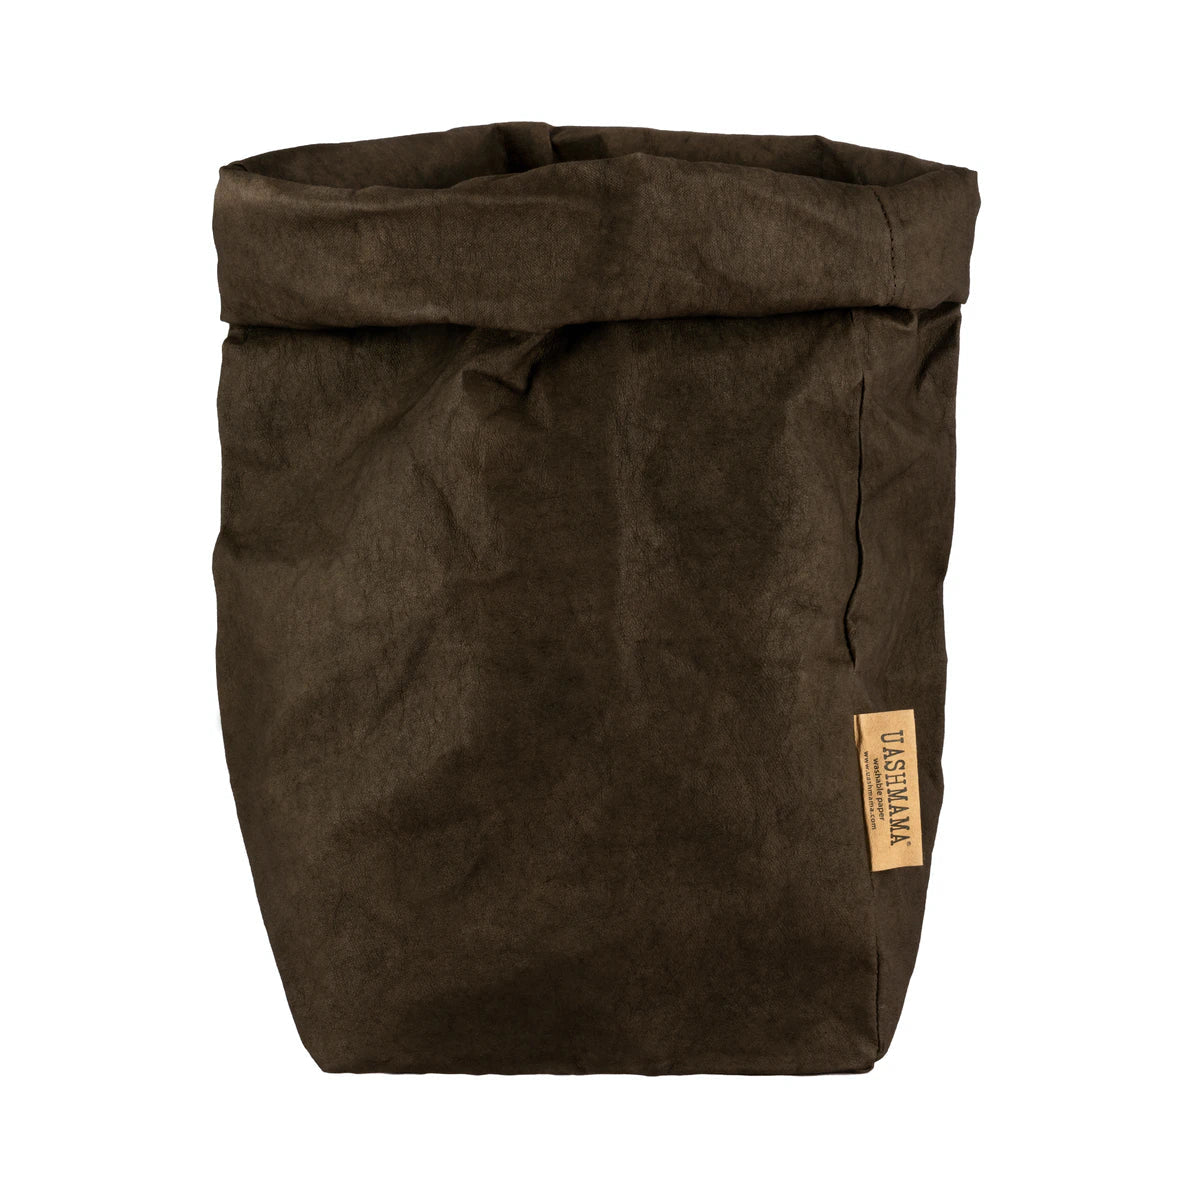 A washable paper bag is shown. The bag is rolled down at the top and features a UASHMAMA logo label on the bottom left corner. The bag pictured is the extra large size in brown.